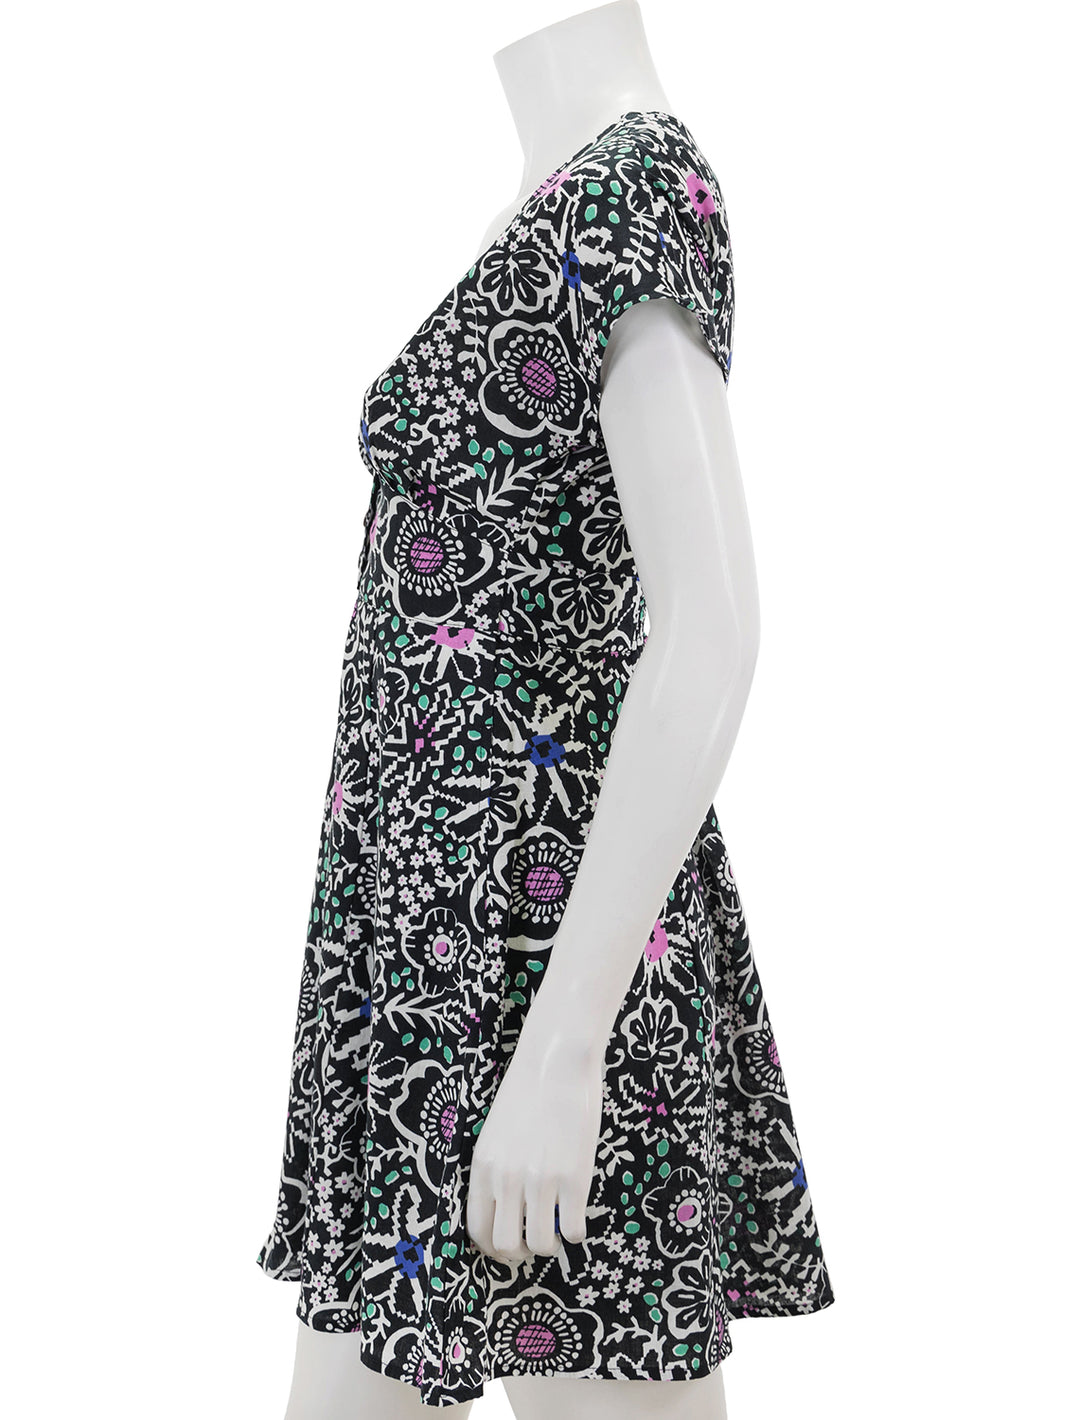 Side view of Marine Layer's camila mini dress in floral block print.